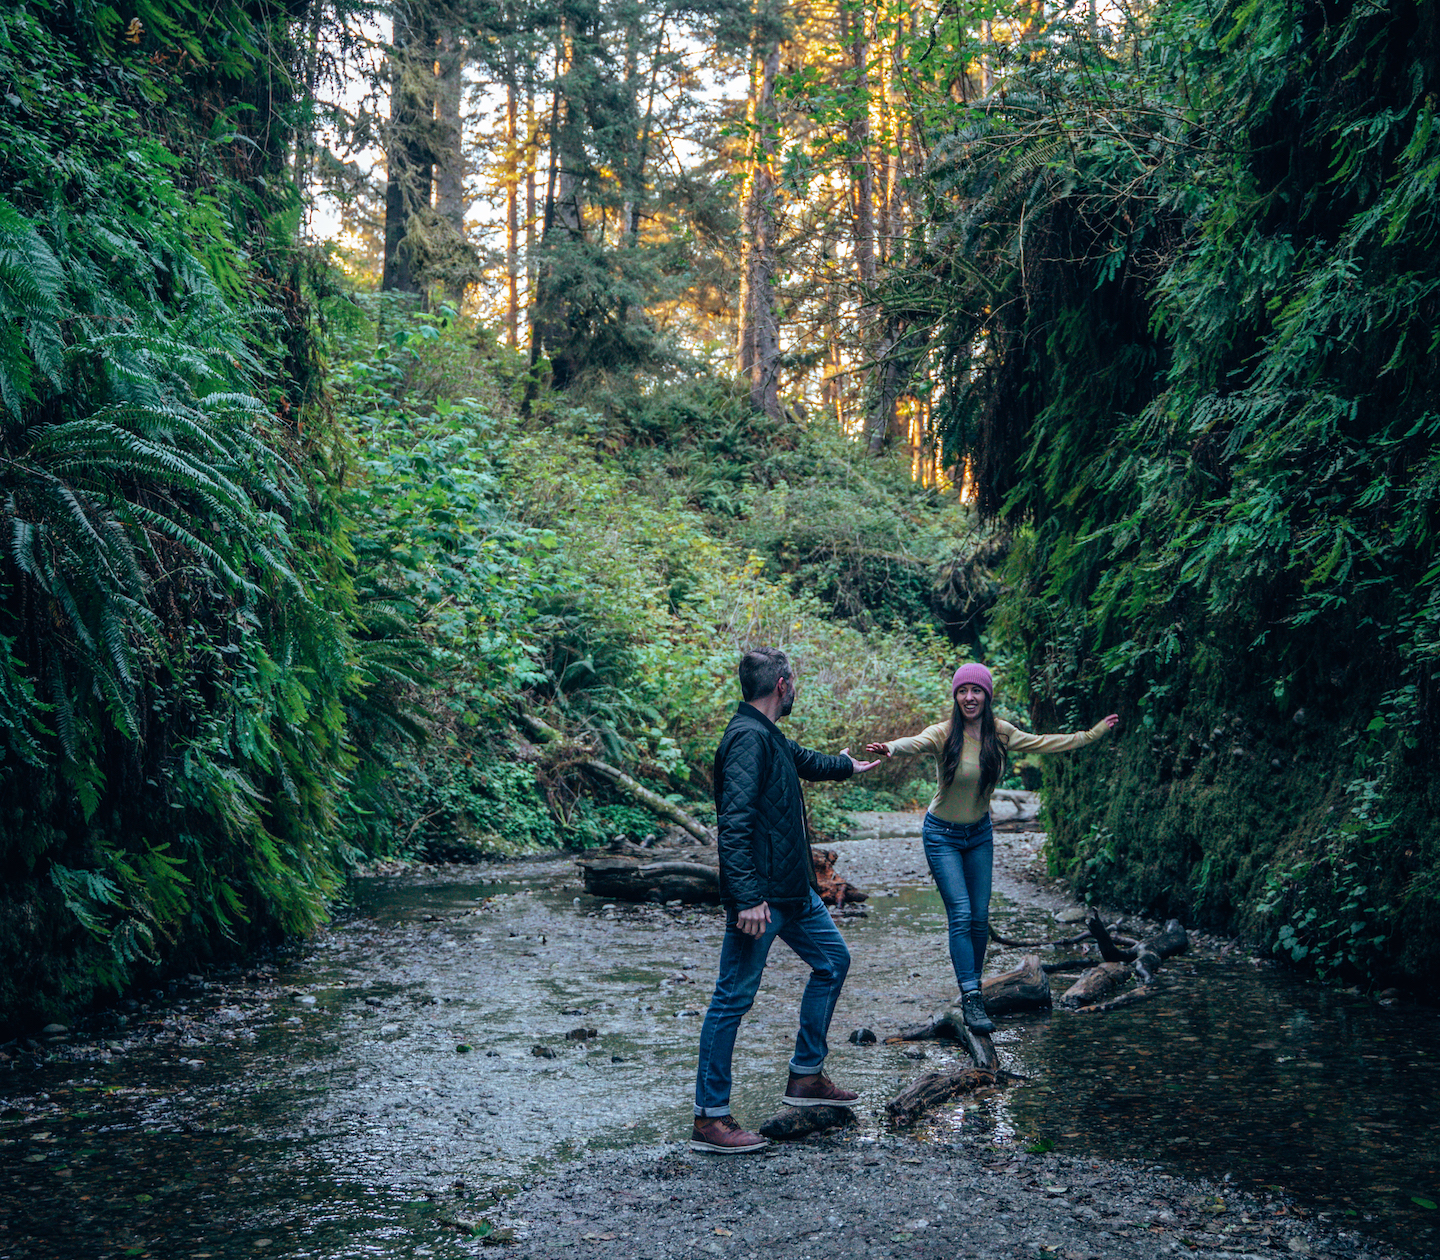 Ryan and Katy in Fern Canyon, Prairie Creek Redwood State Park, CA